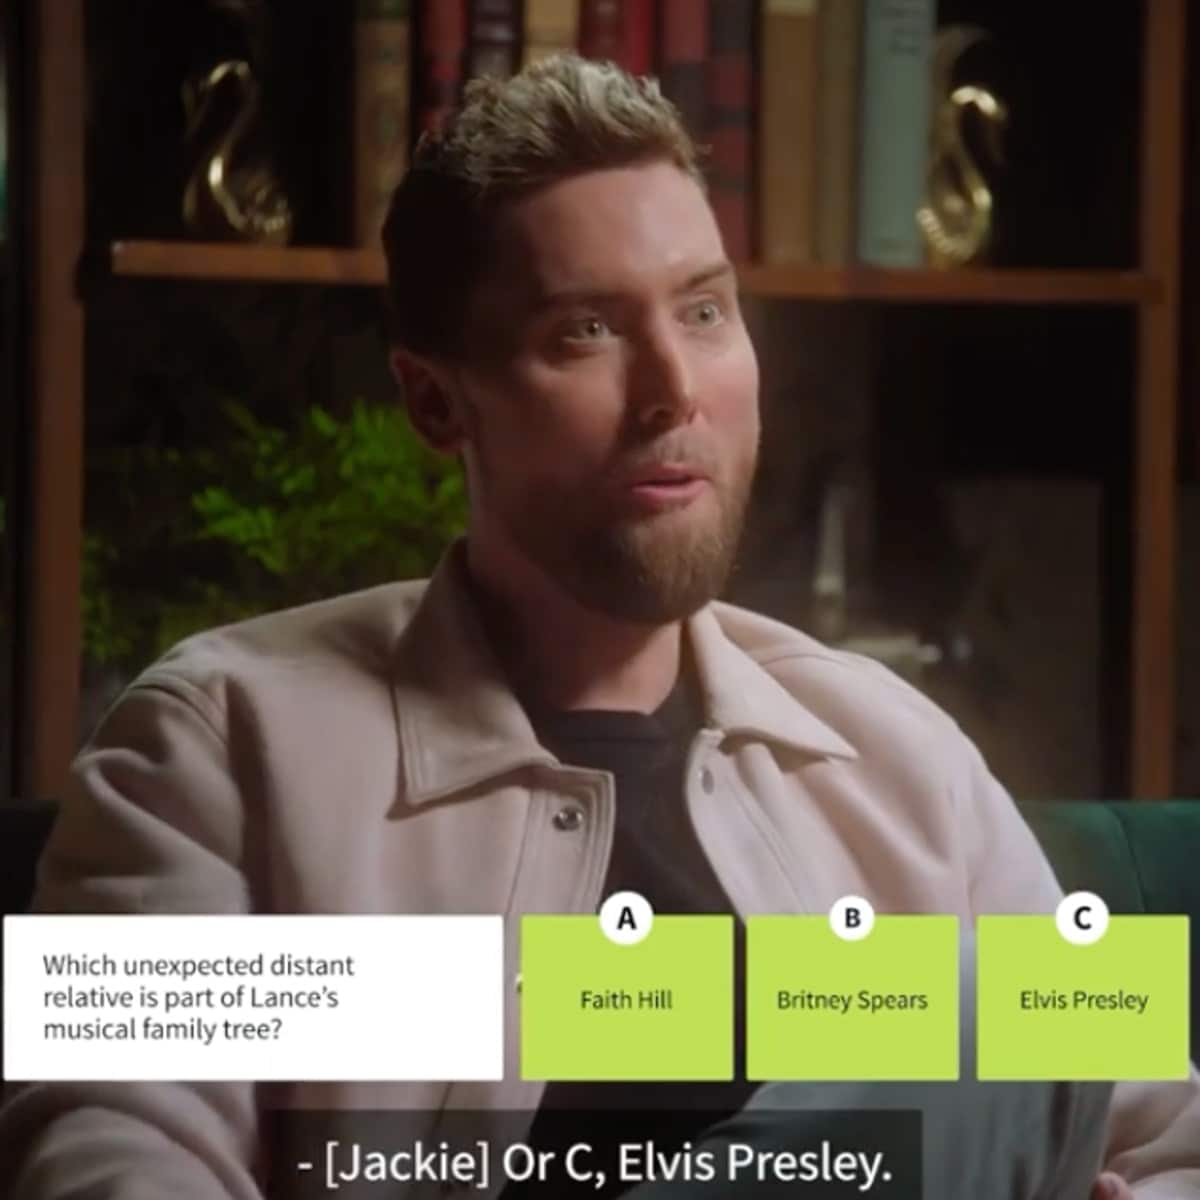 Lance Bass is shocked to find out he is related to Britney Spears